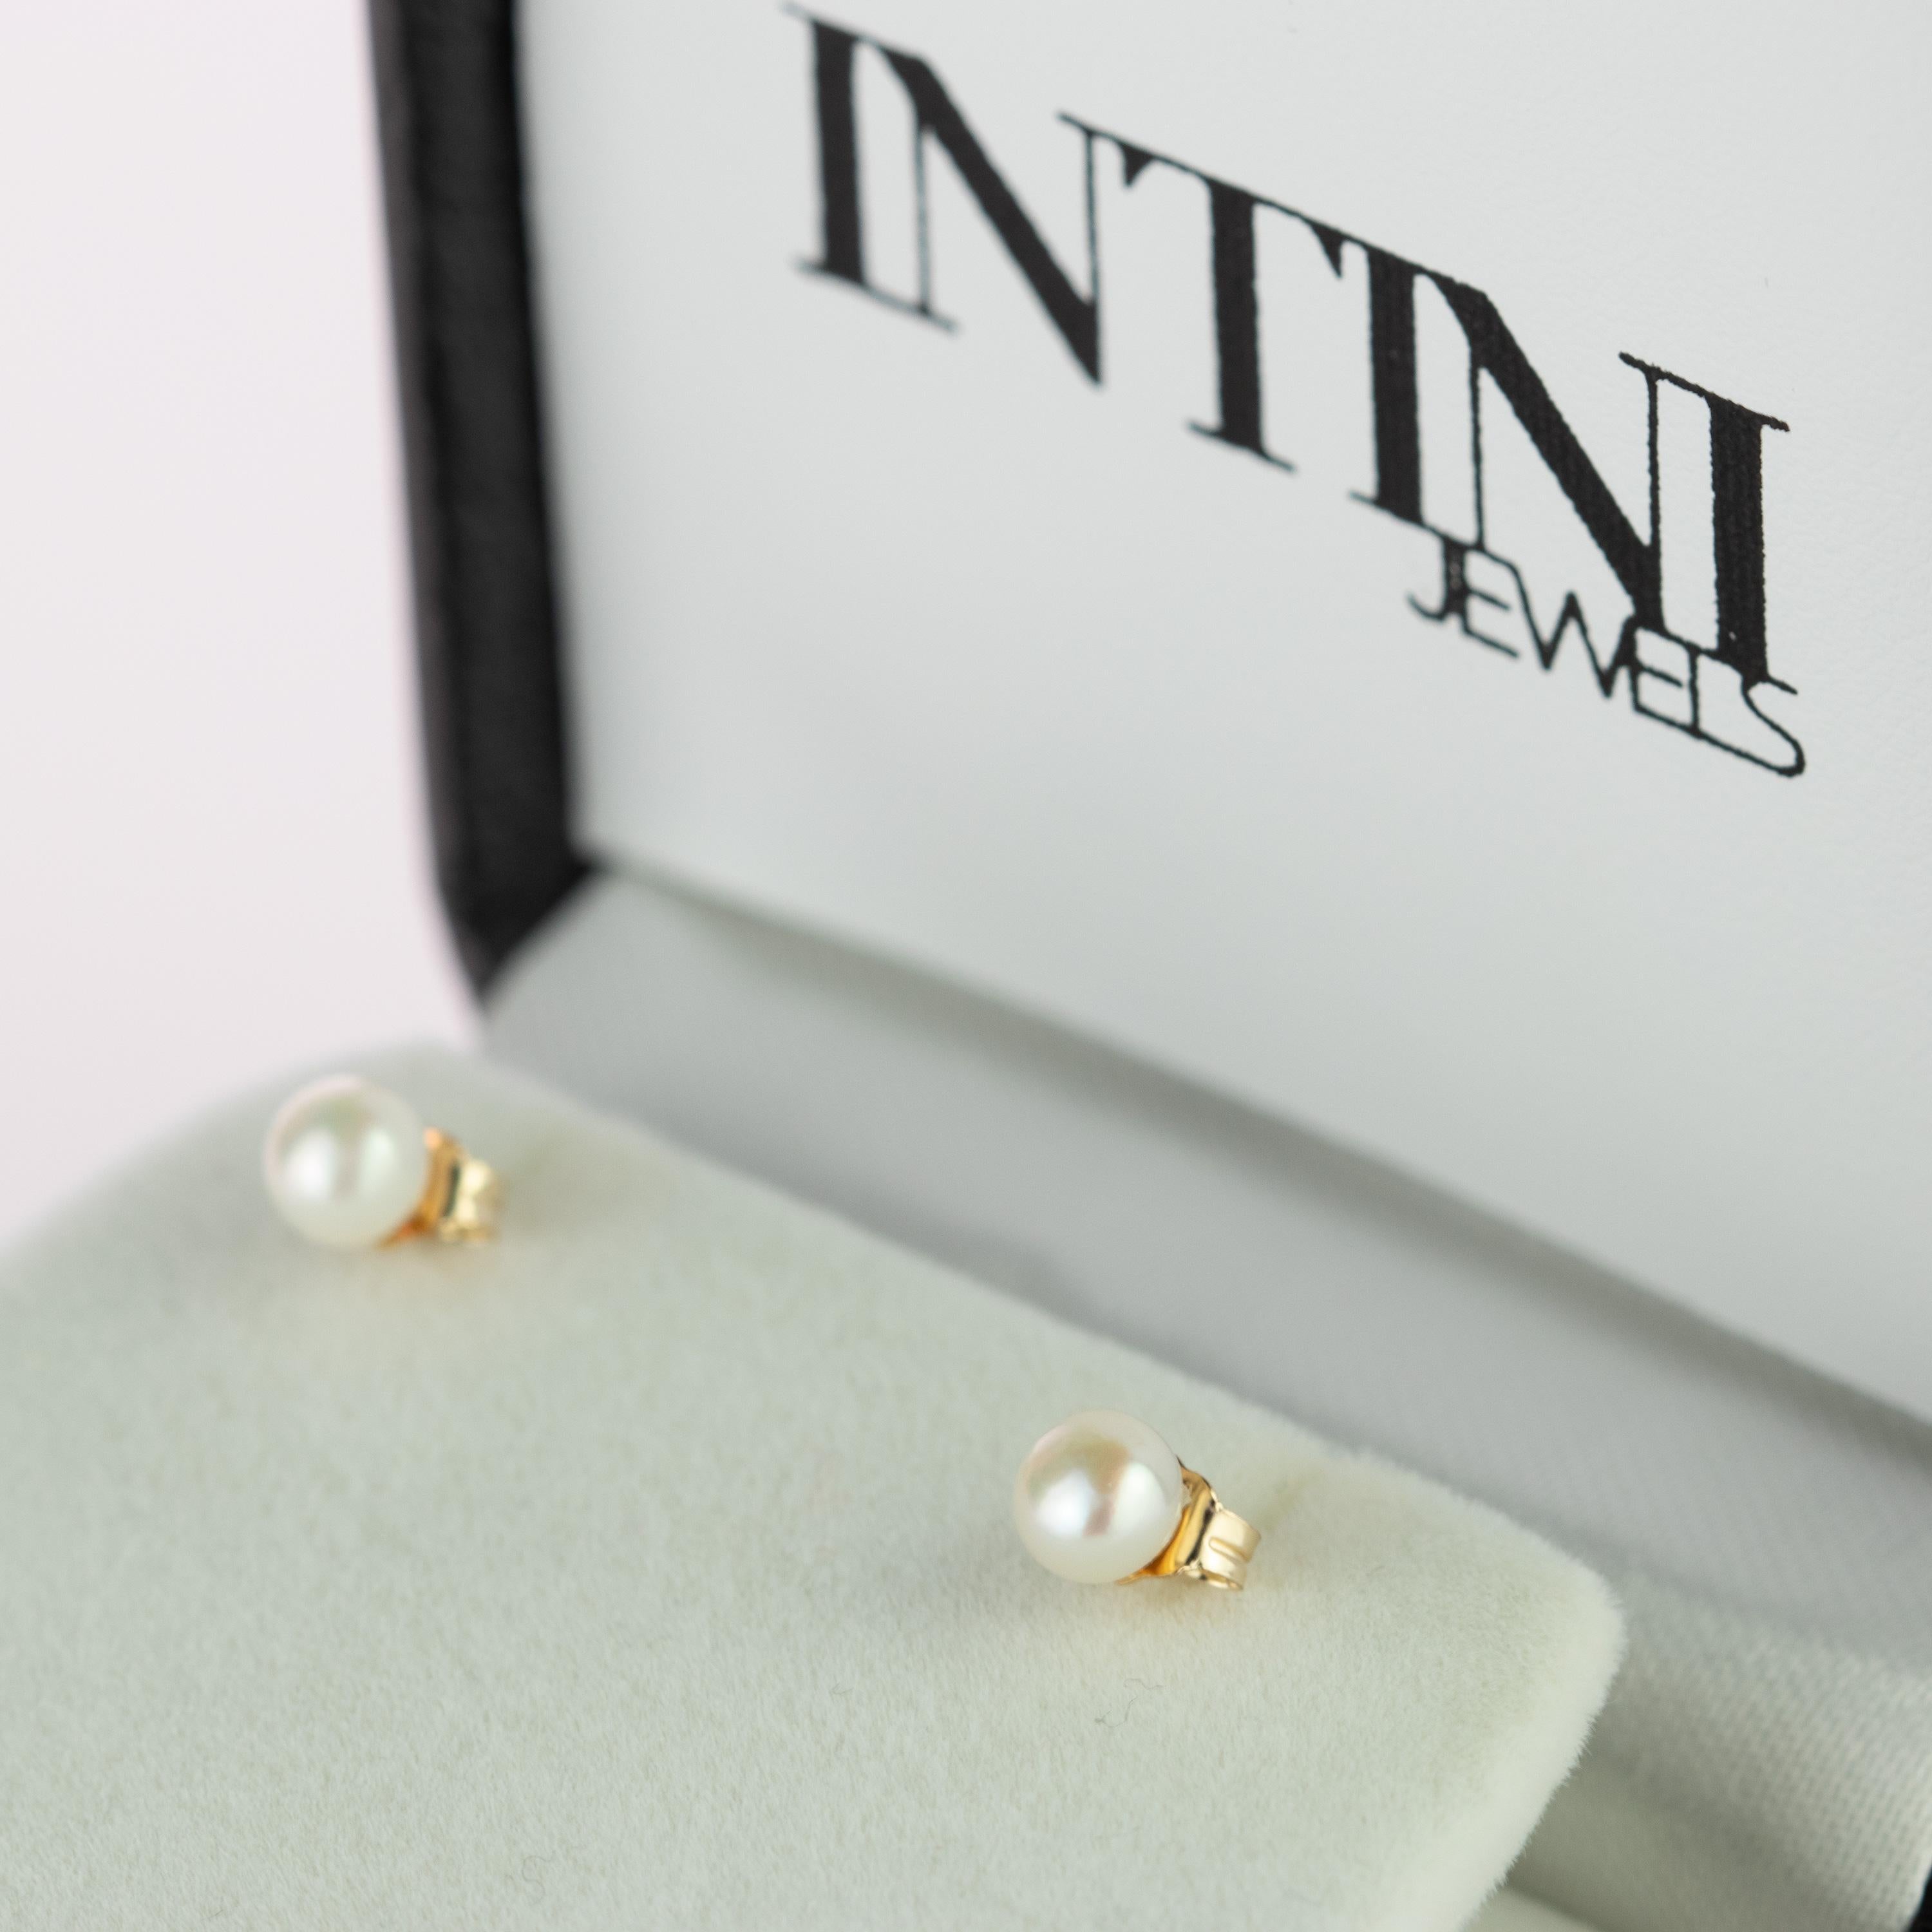 Splendid and breathtaking natural artisan pearl. Italian stud earrings full of charisma and serene beauty. These round freshwater 0.5 cm pearls embellished with 14 karat yellow gold create a simple and elegant deco look for any occasion. Ranking